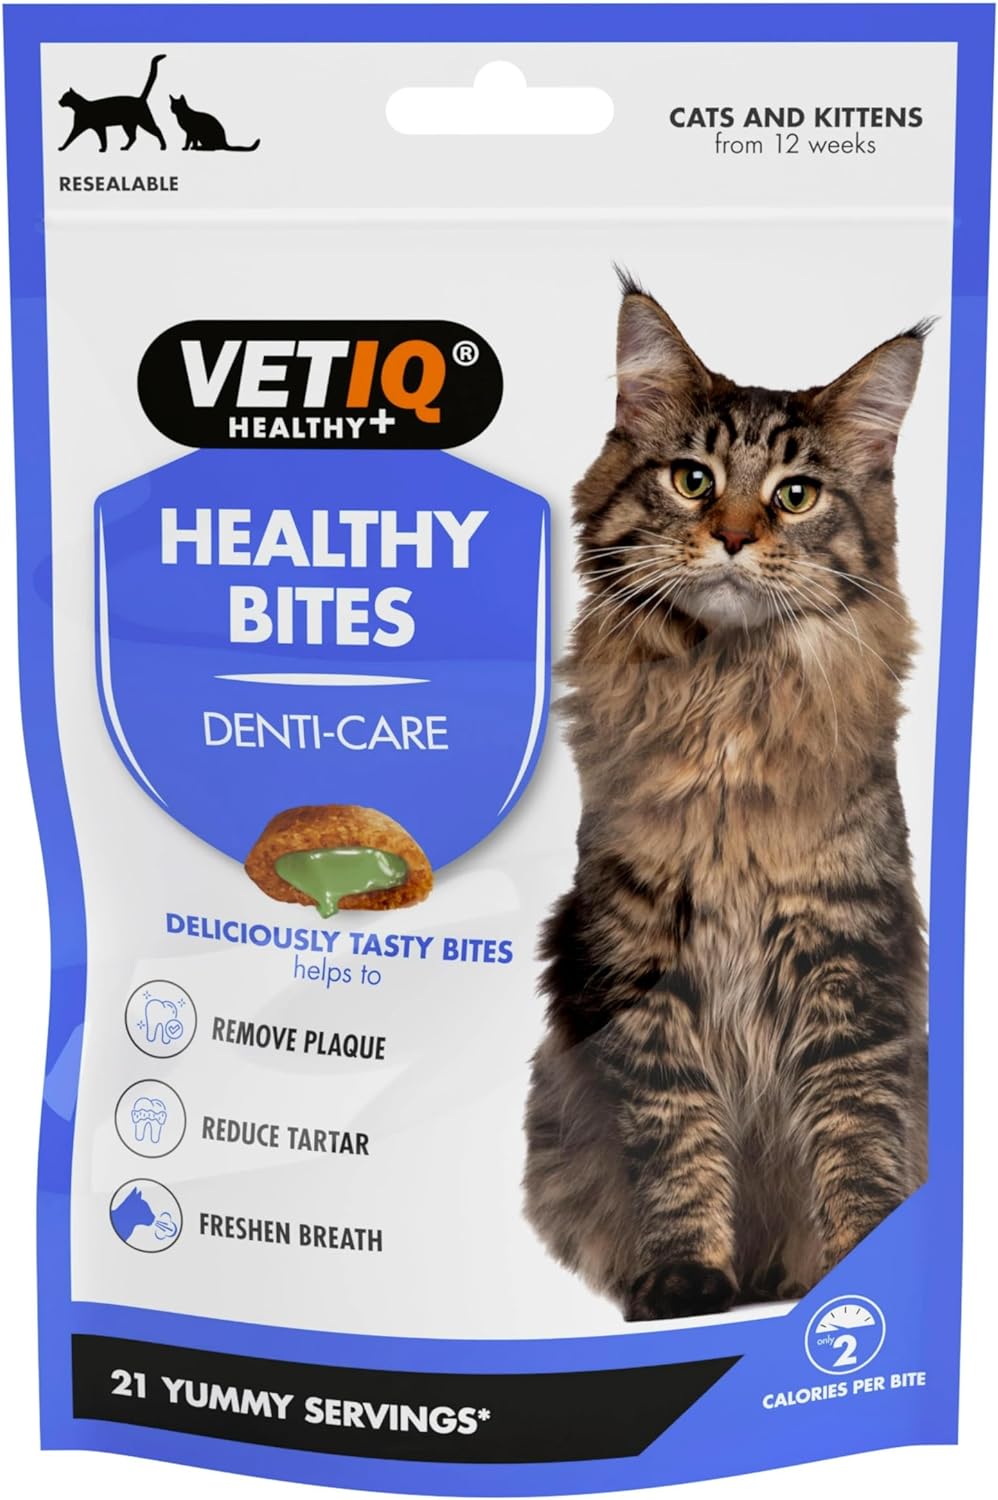 VETIQ Healthy Bites Denti-Care Treats for Cats & Kittens 12+ Weeks, High Protein with Duck (4%), Helps to Reduce Plaque & Tartar & Freshens Breath, 65 g (Pack of 8)